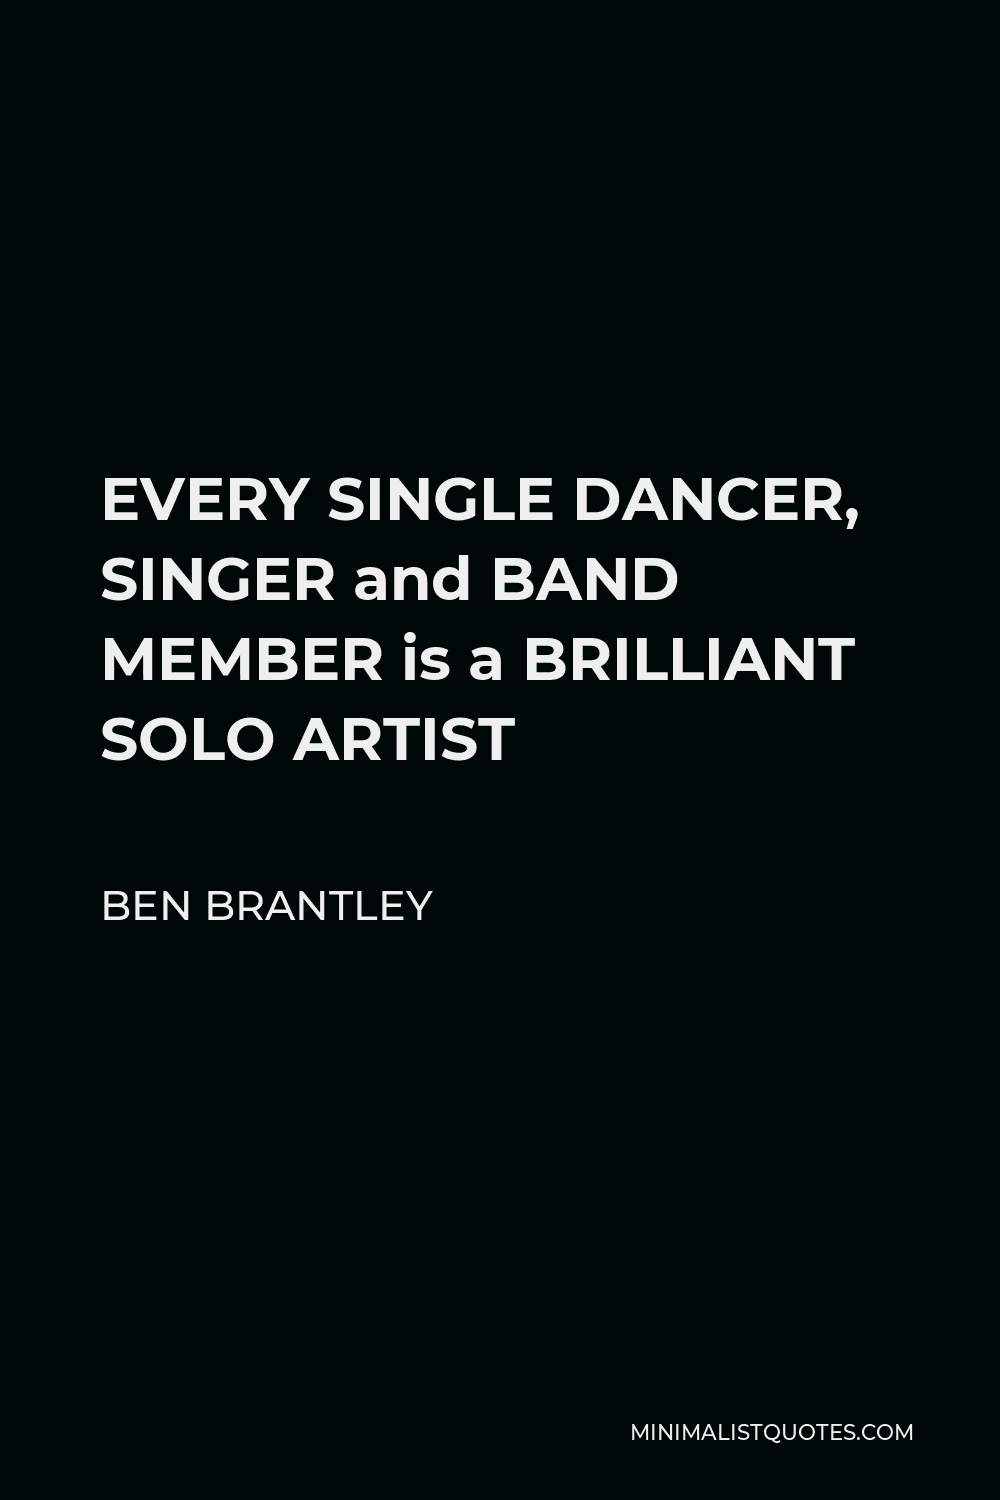 Ben Brantley Quote - EVERY SINGLE DANCER, SINGER and BAND MEMBER is a BRILLIANT SOLO ARTIST